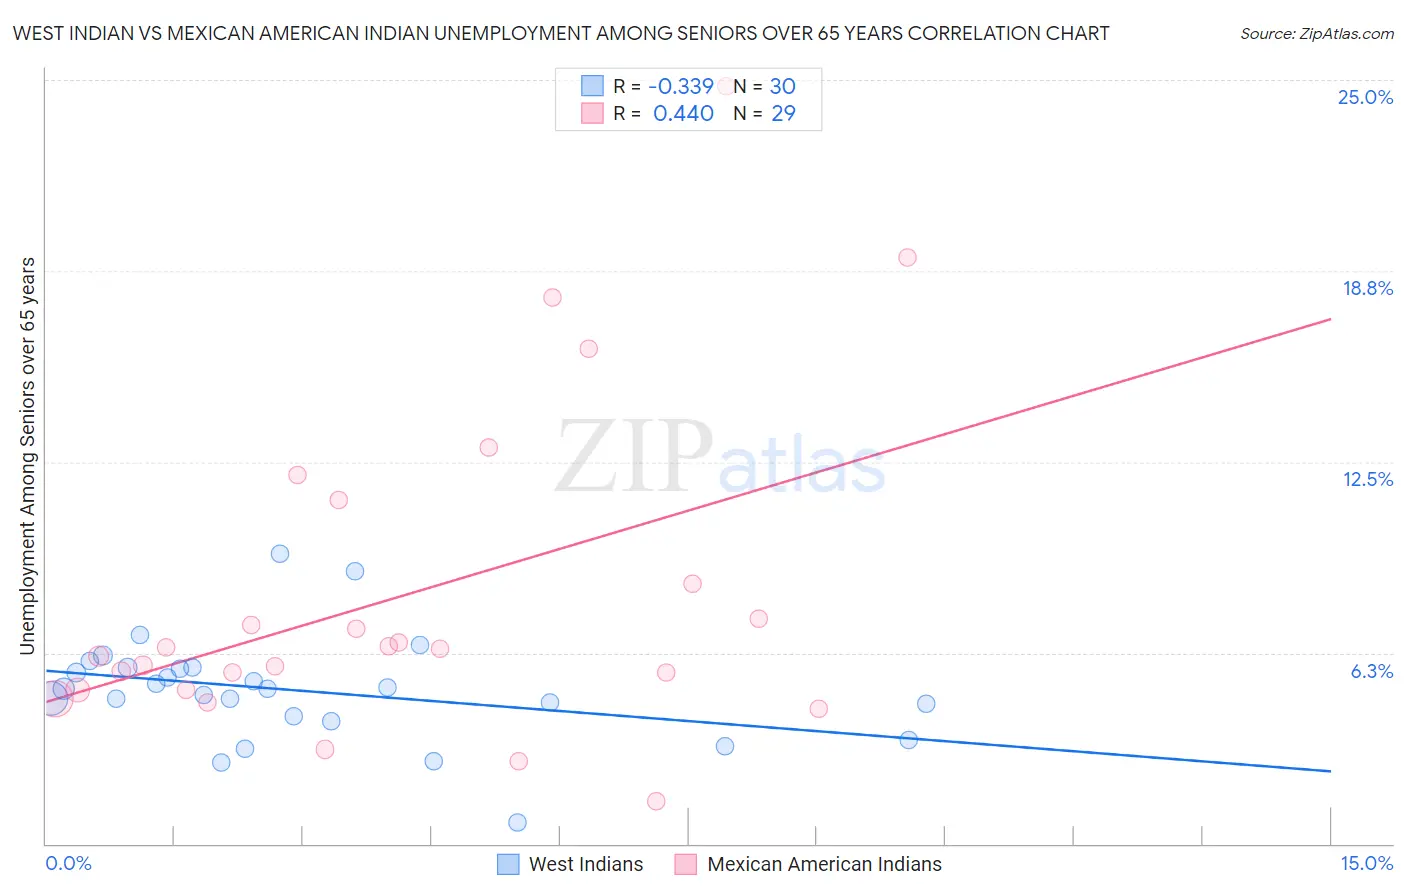 West Indian vs Mexican American Indian Unemployment Among Seniors over 65 years